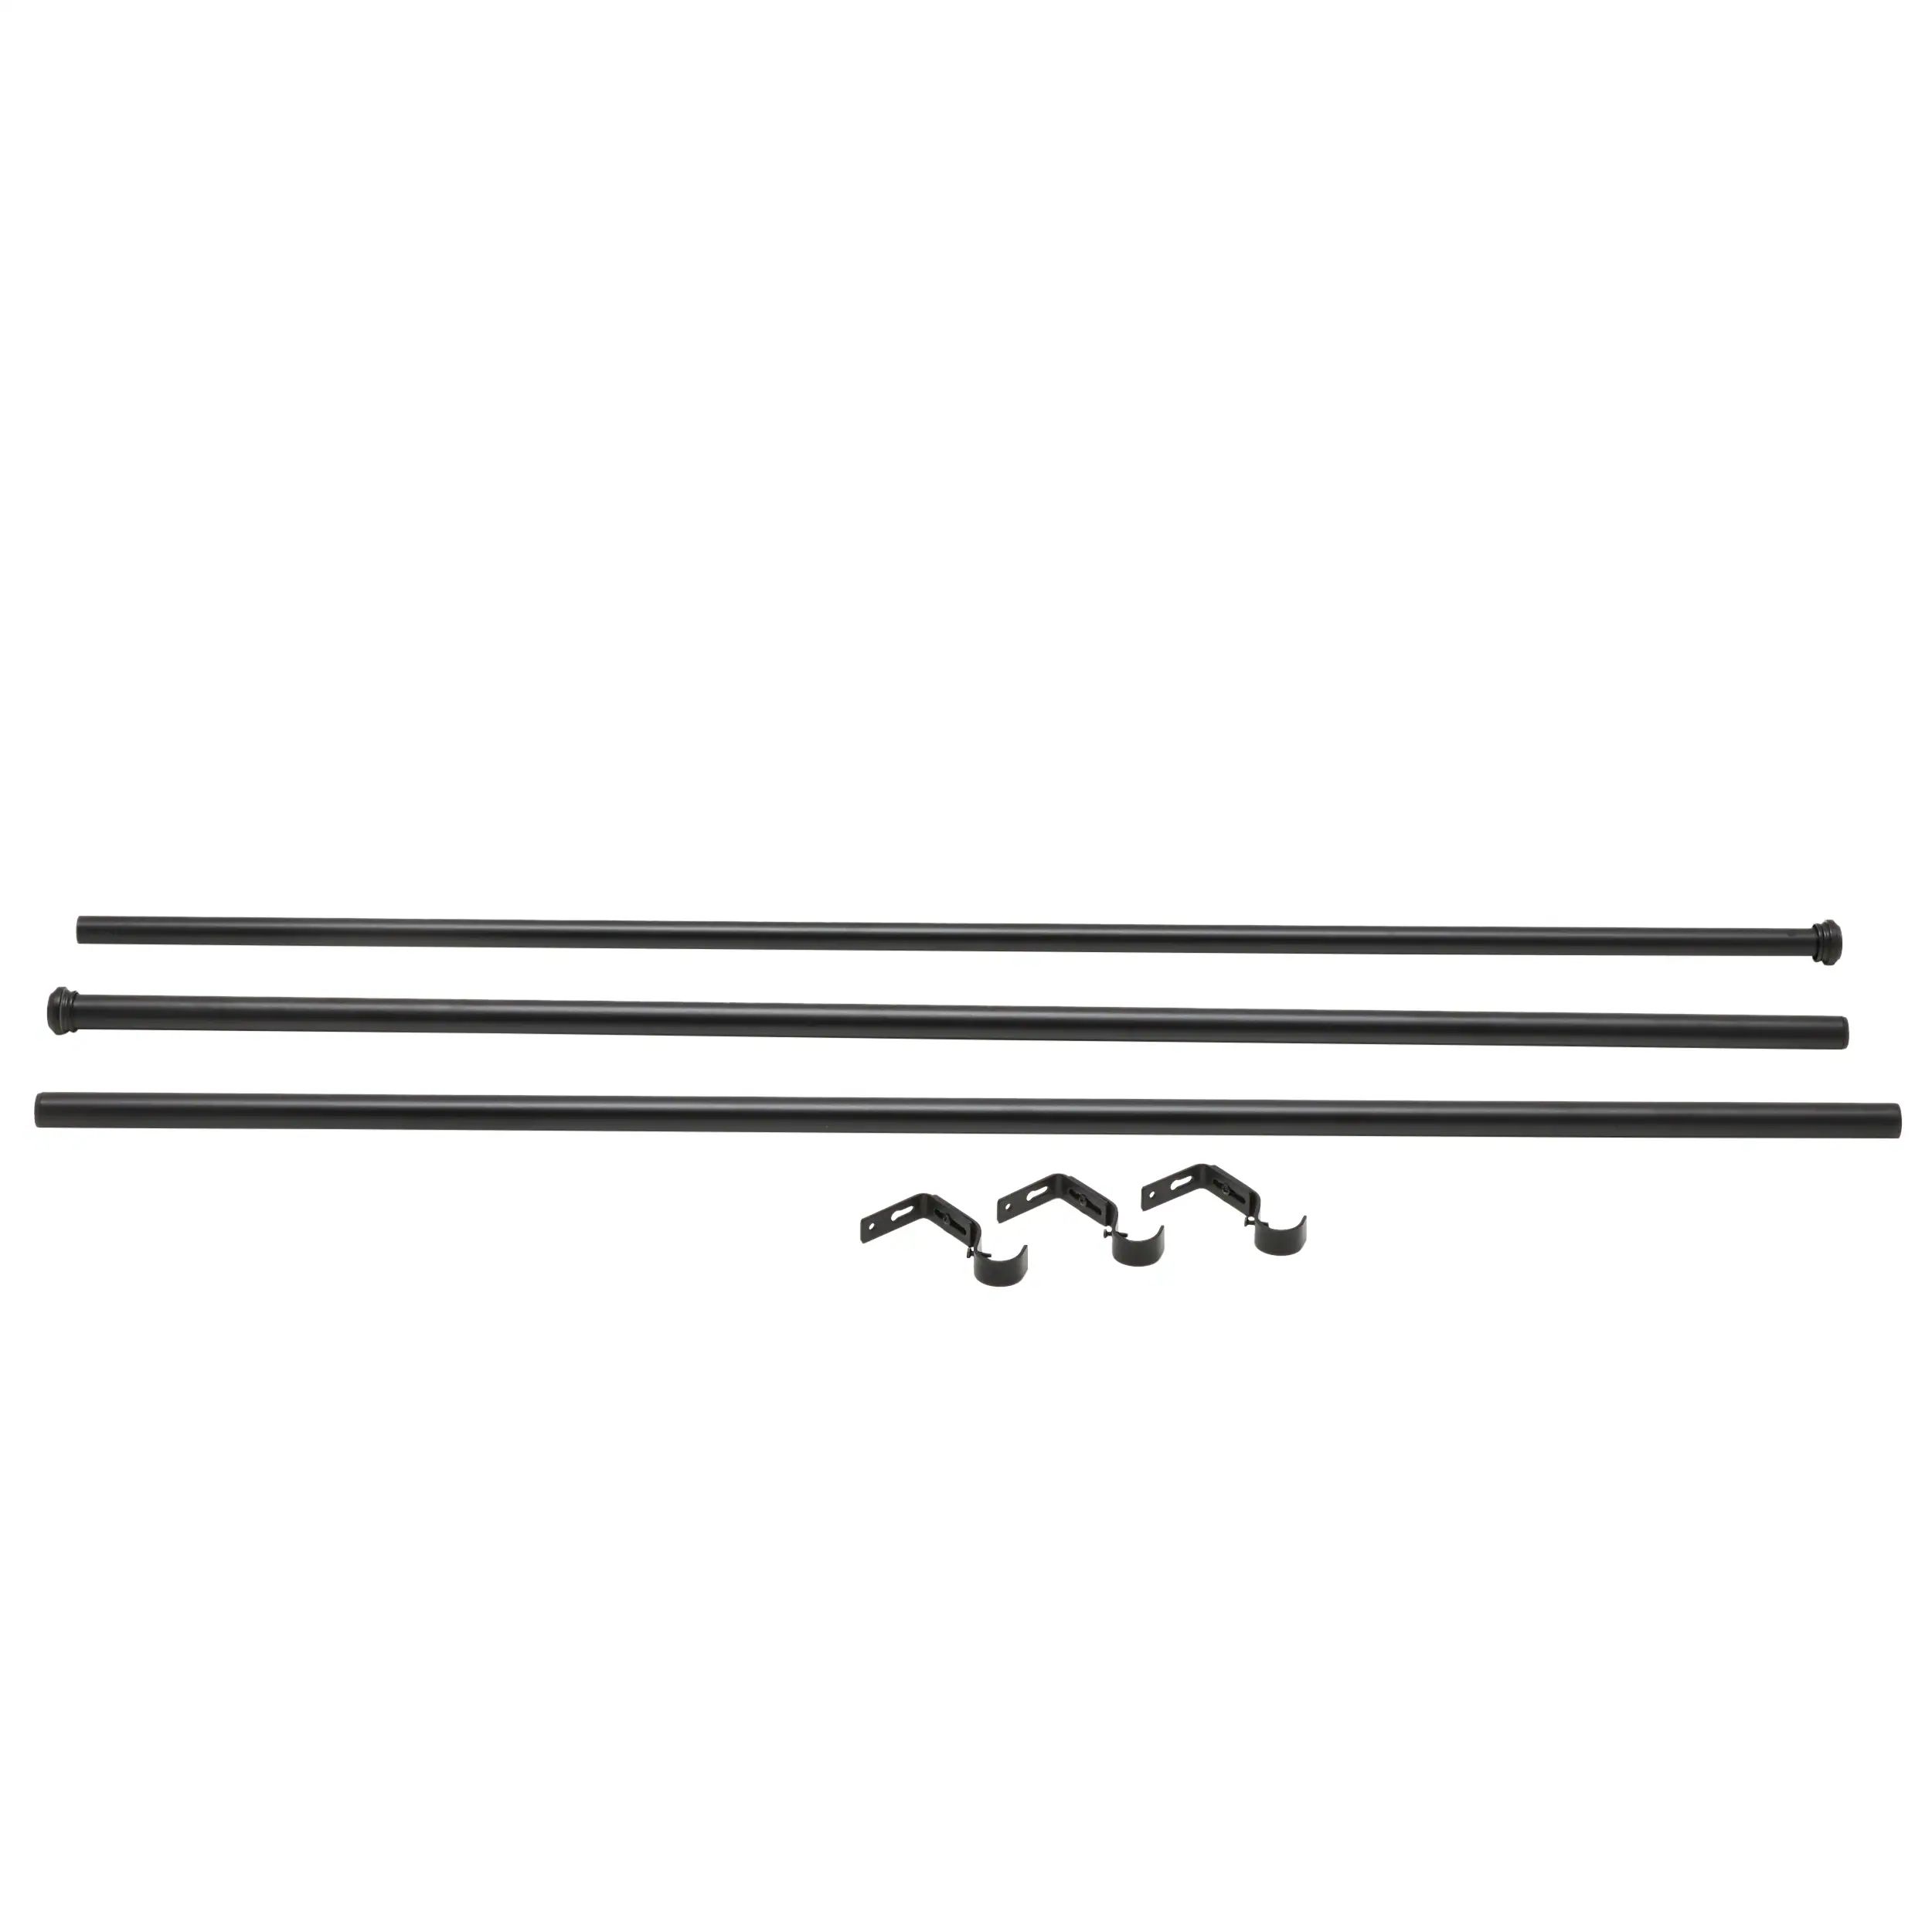 Allen and roth black curtain rod at Lowes.com: Search Results | Lowe's